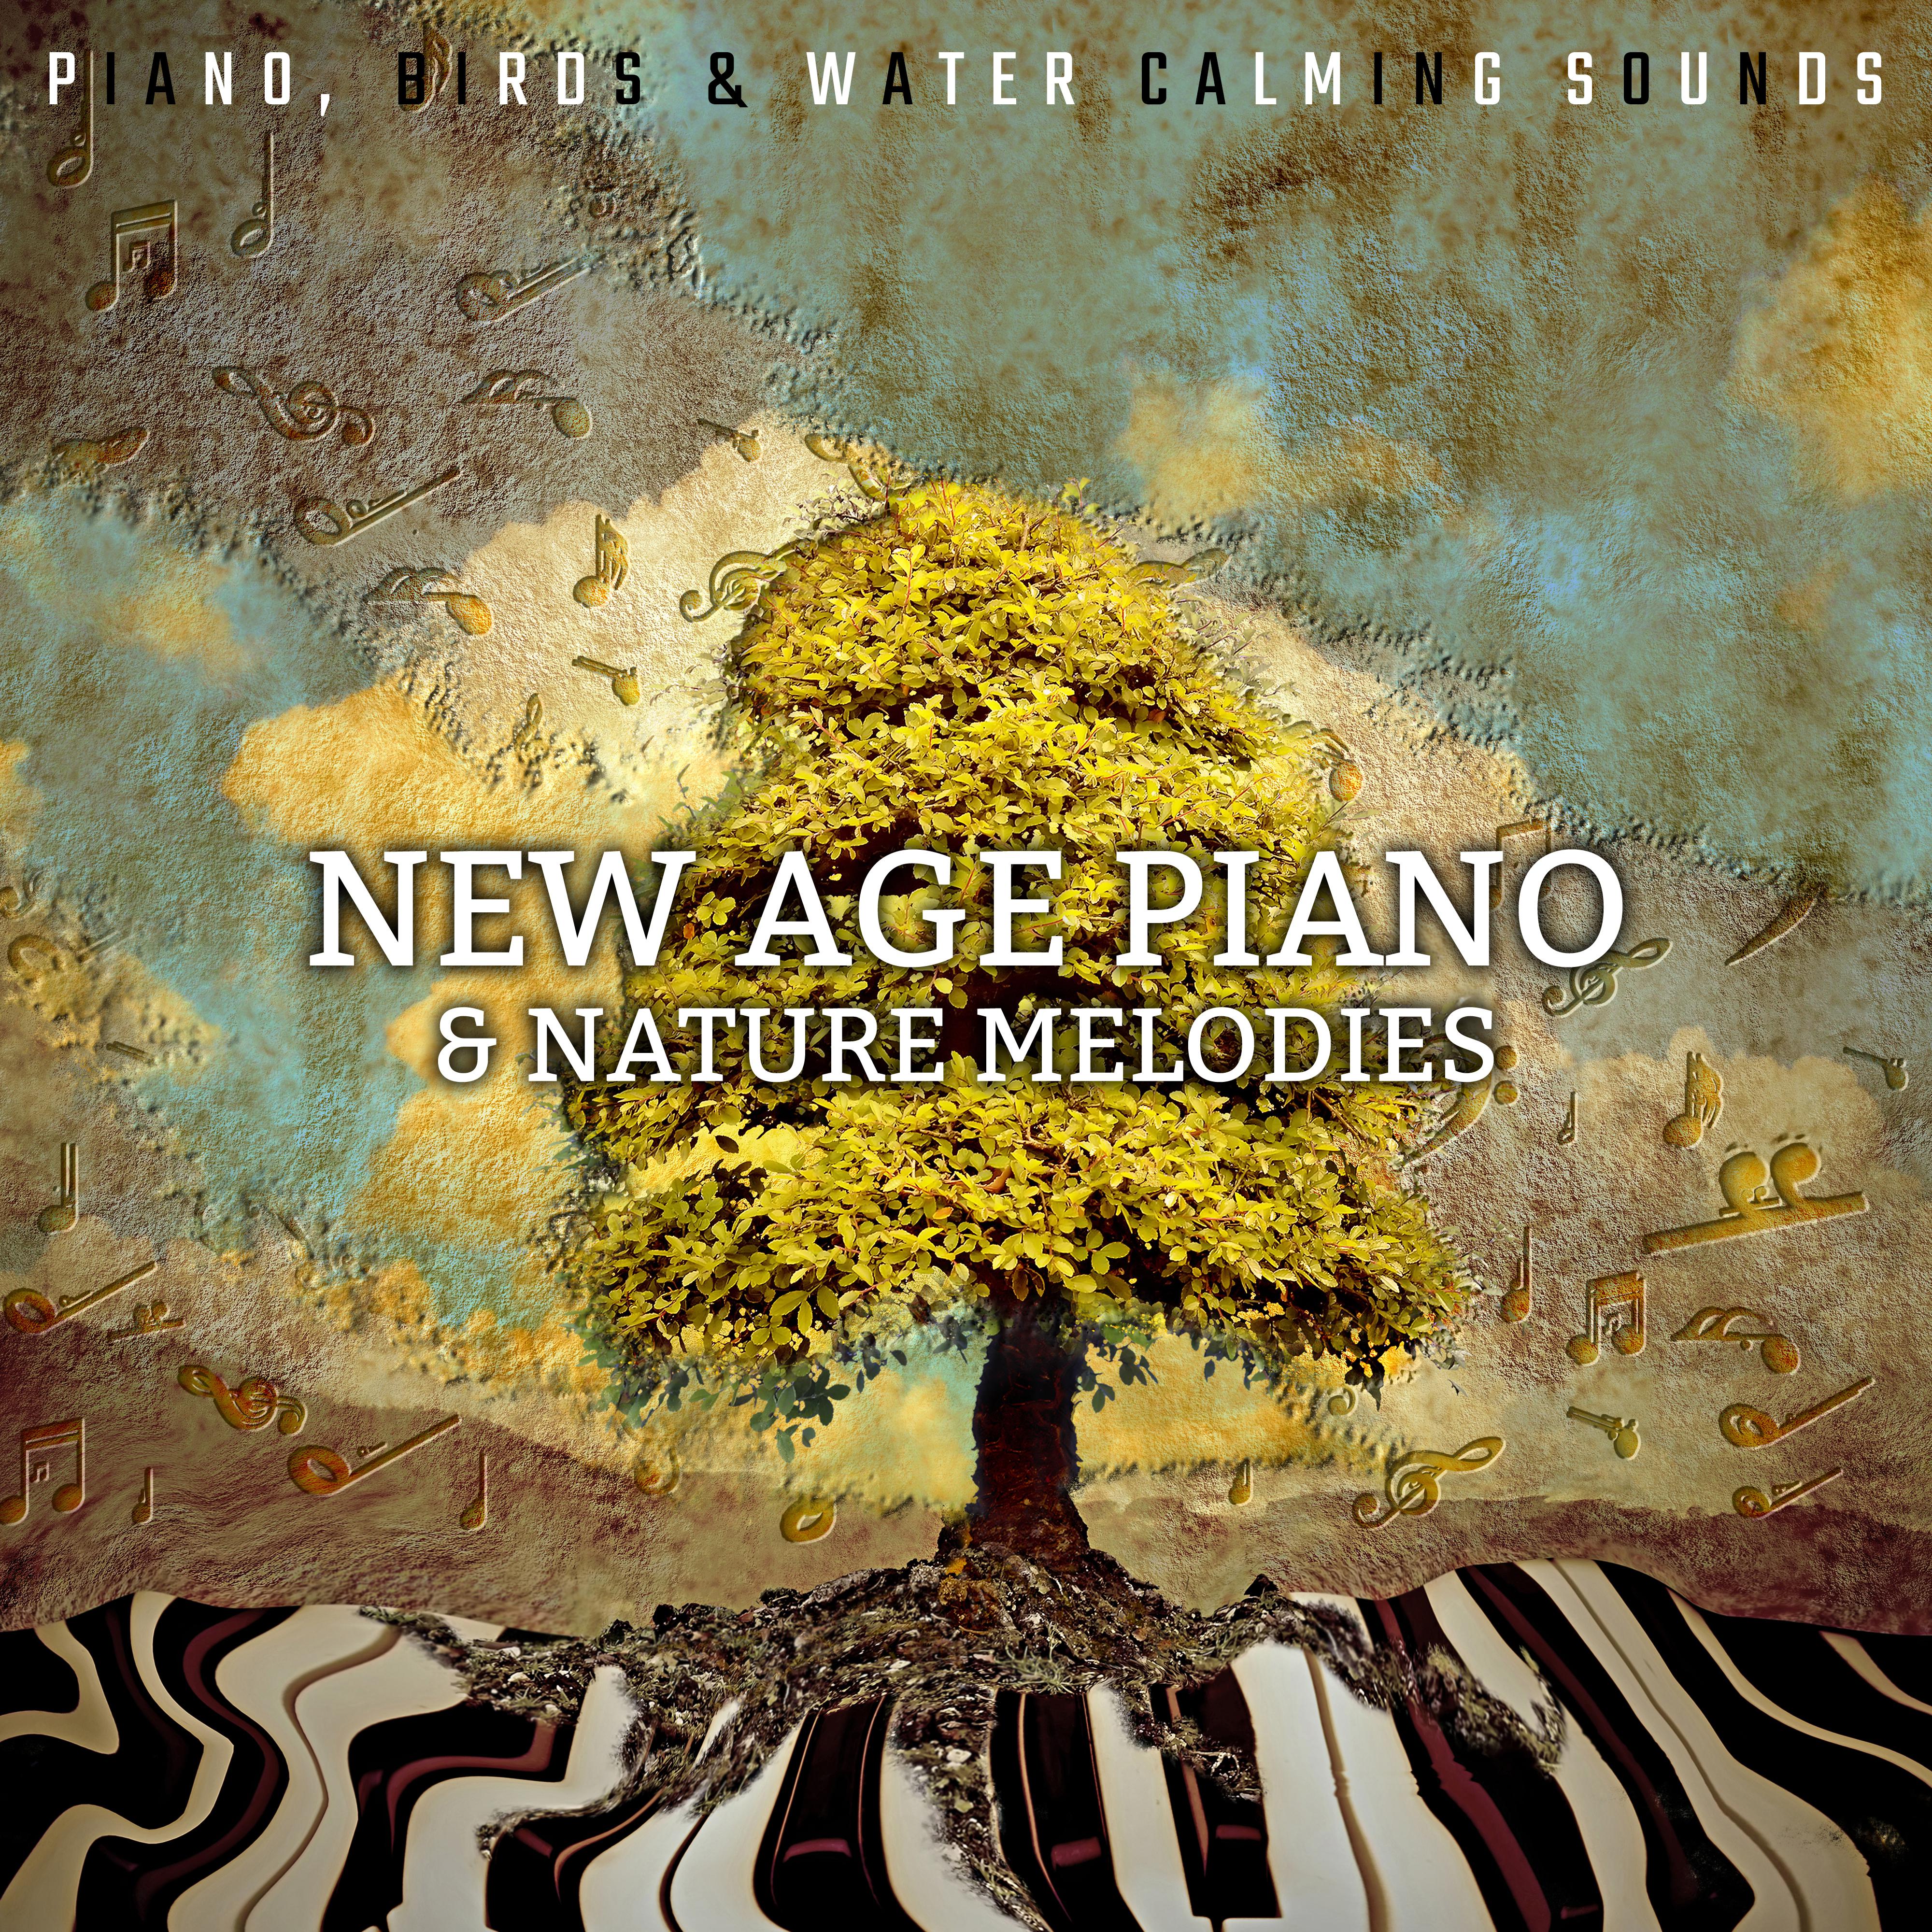 New Age Piano & Nature Melodies – Piano, Birds & Water Calming Sounds